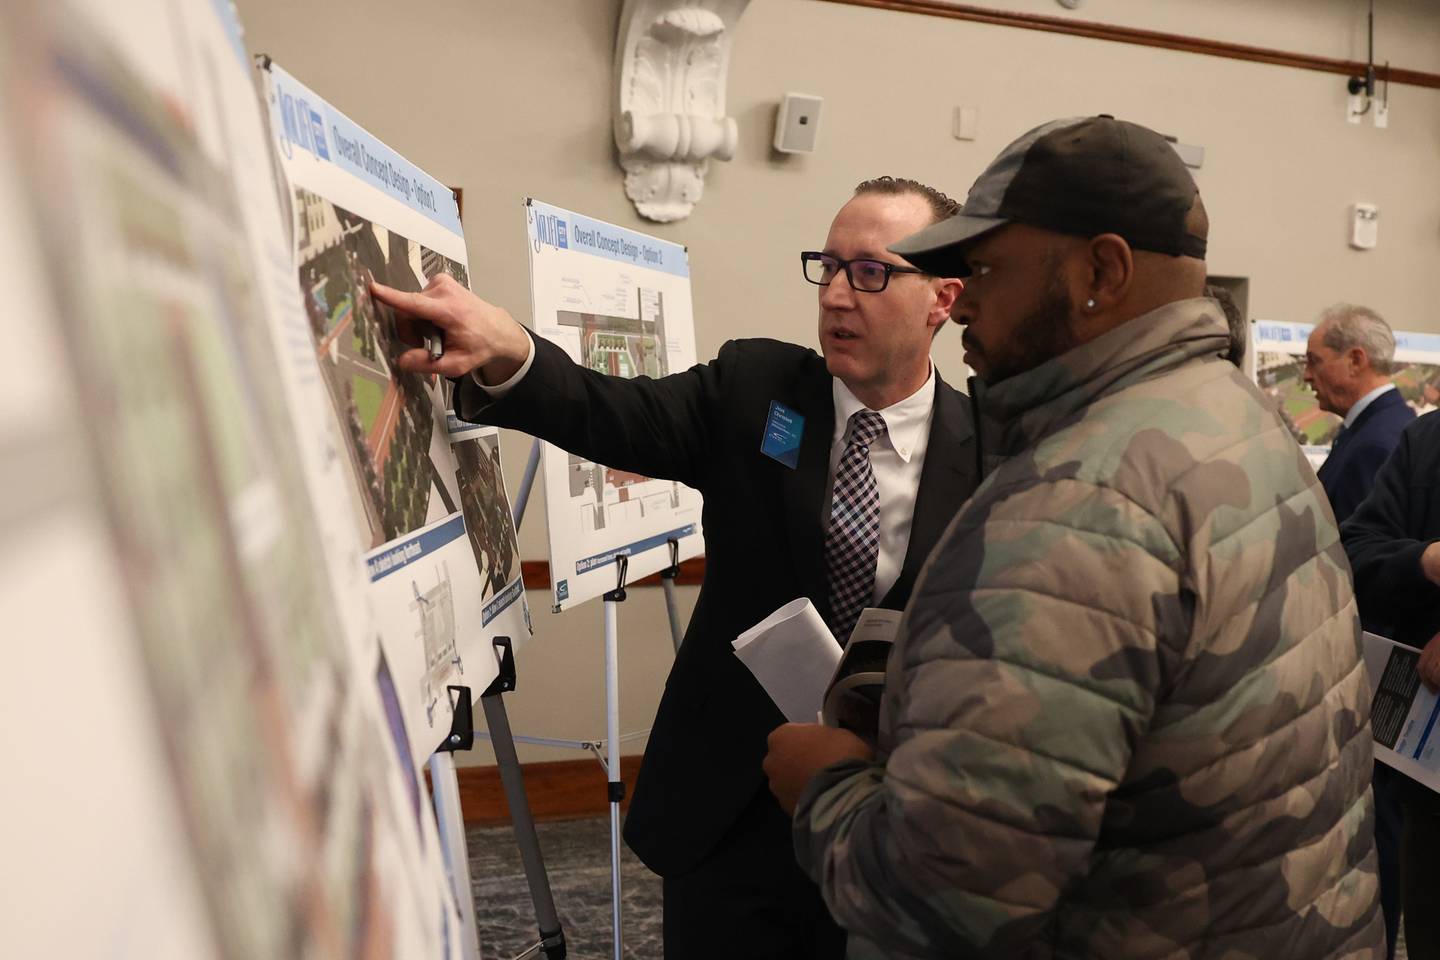 Joel Christell (left), of Civiltech Engineering Inc, goes over designs for the proposed plaza with Marzell Robinson, owner of Robinson’s Restaurant, during the City of Joliet downtown plaza open house at the Joliet Public Library on Thursday, February 23rd, 2023.